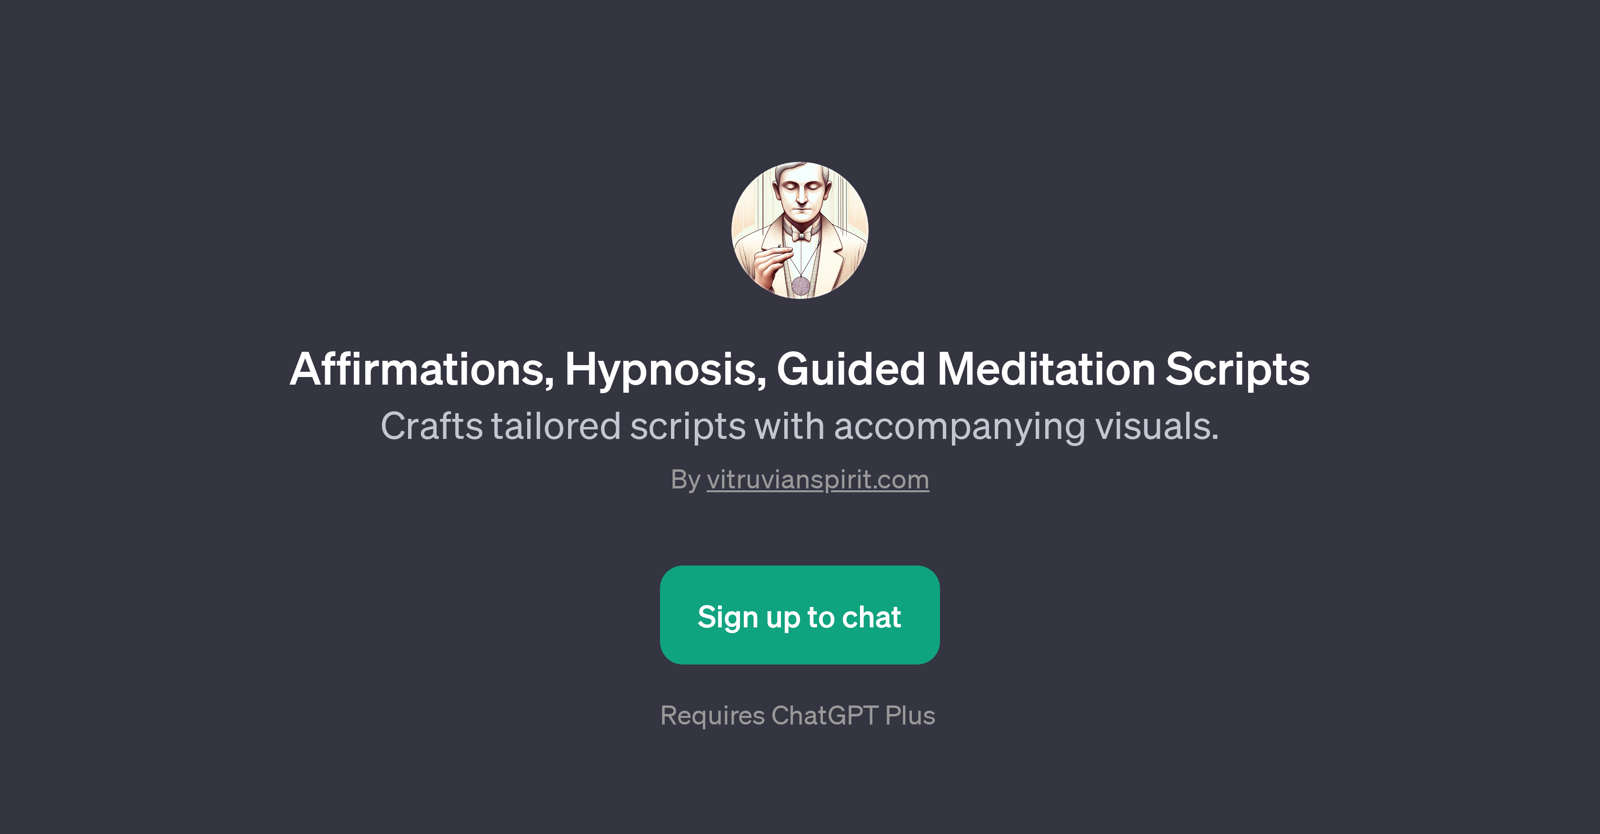 Affirmations, Hypnosis, Guided Meditation Scripts GPT website